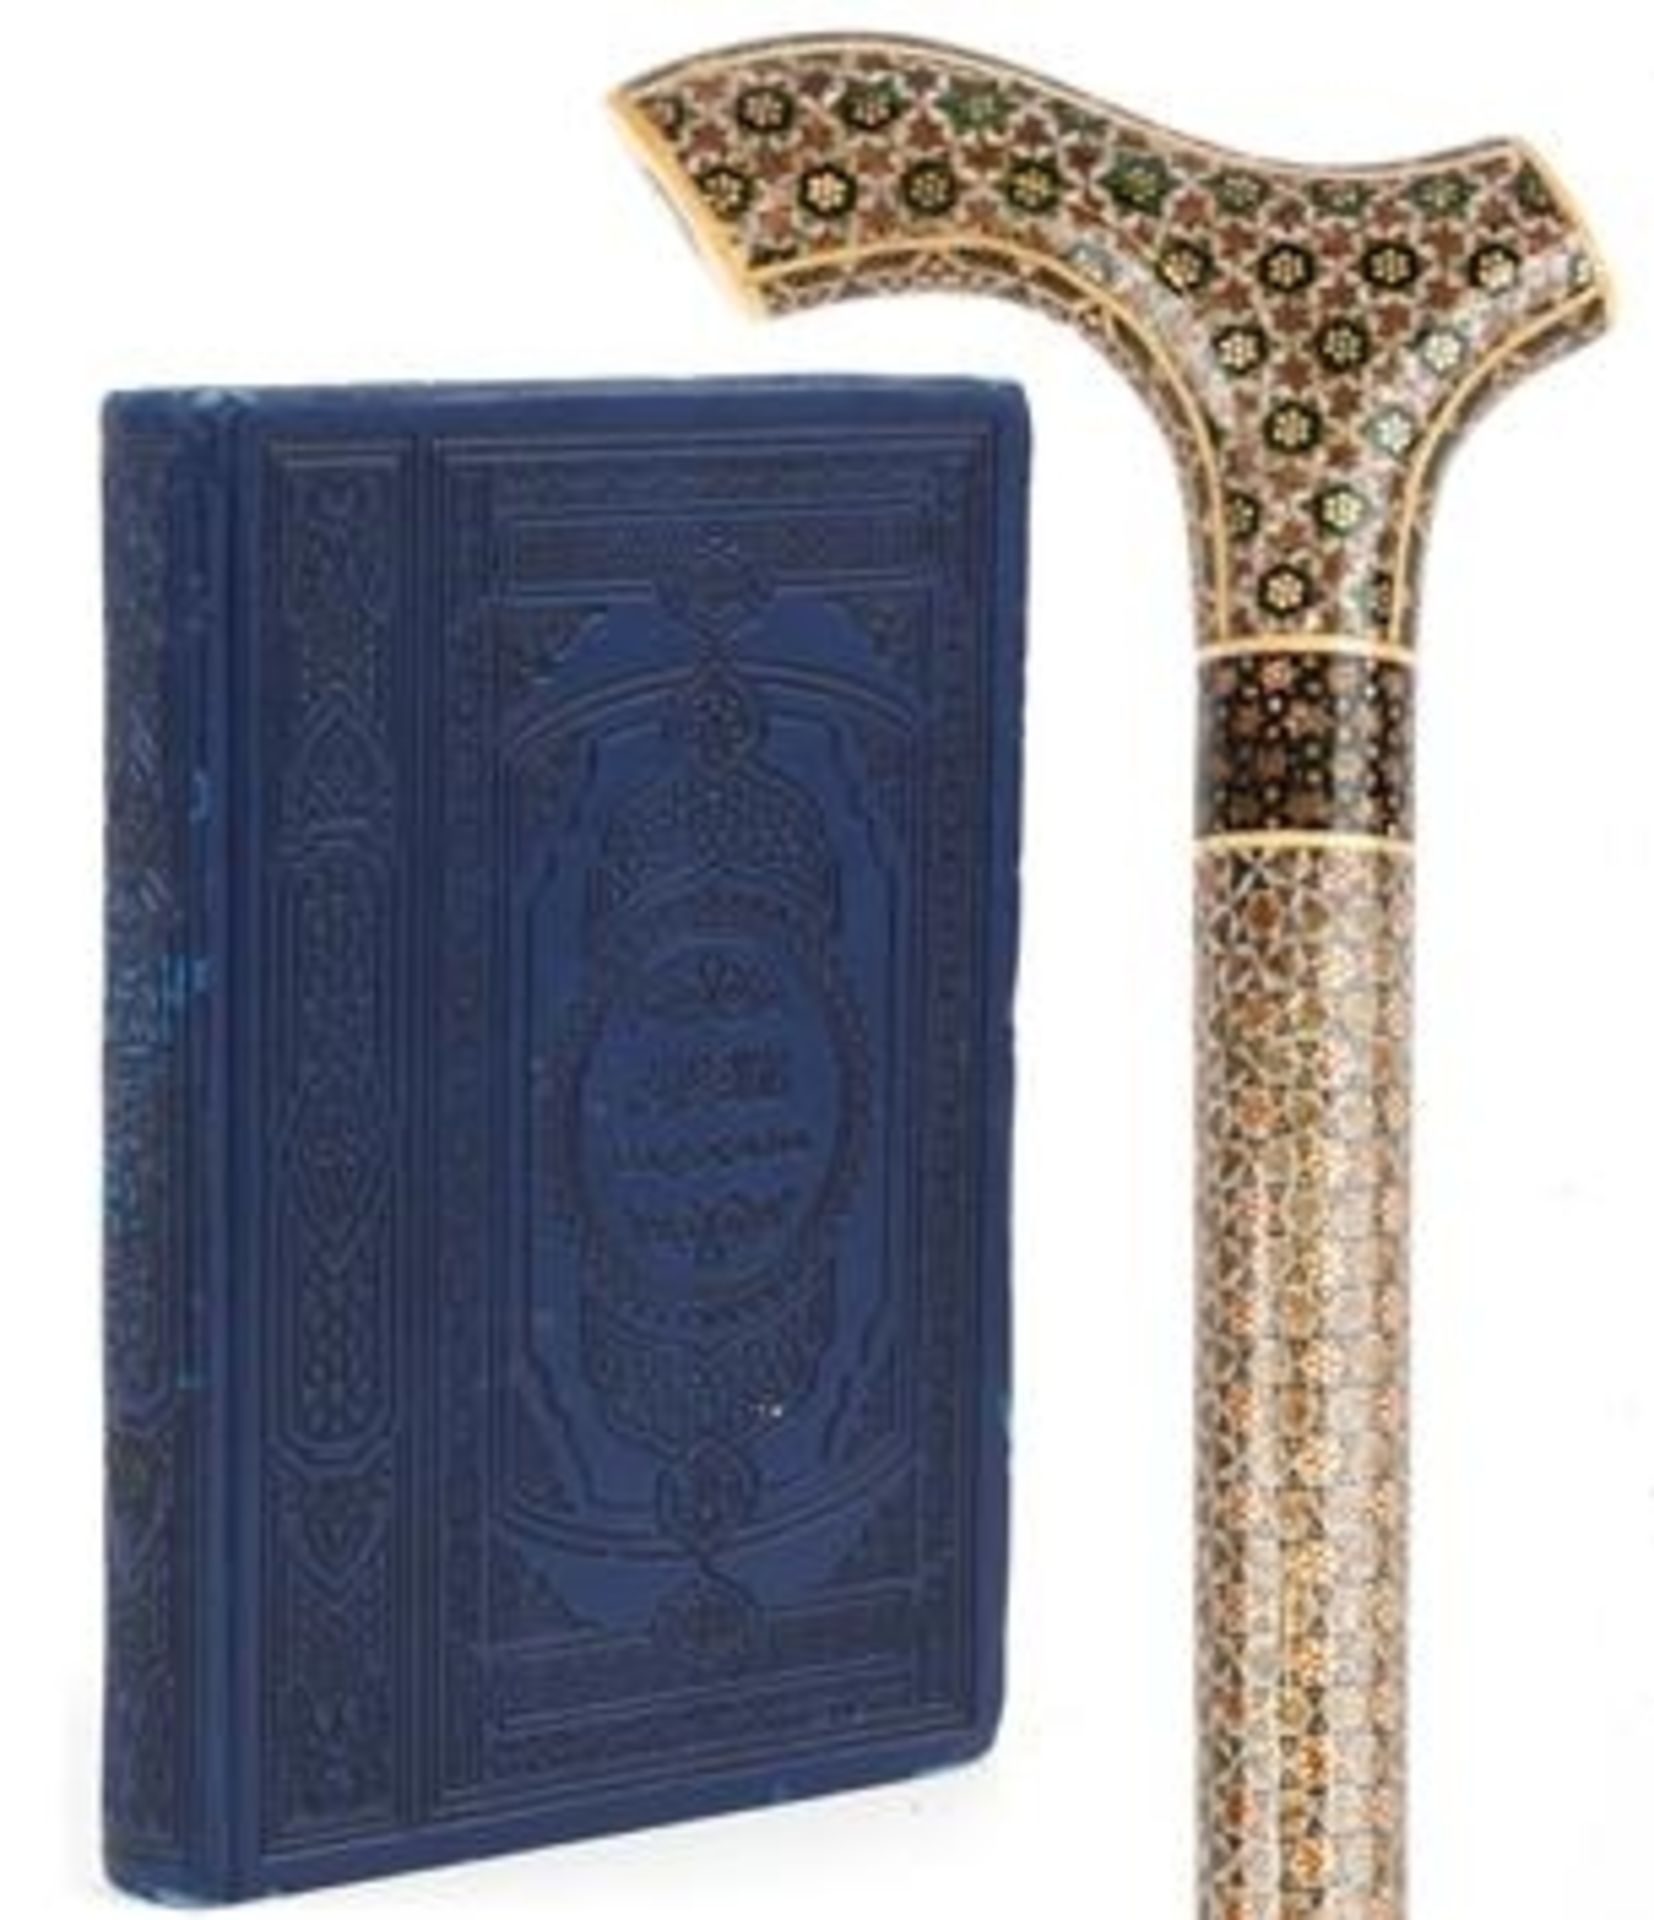 Vizagapatam style Islamic micro mosaic inlaid walking stick and a leather bound Quran, 95.5cm in